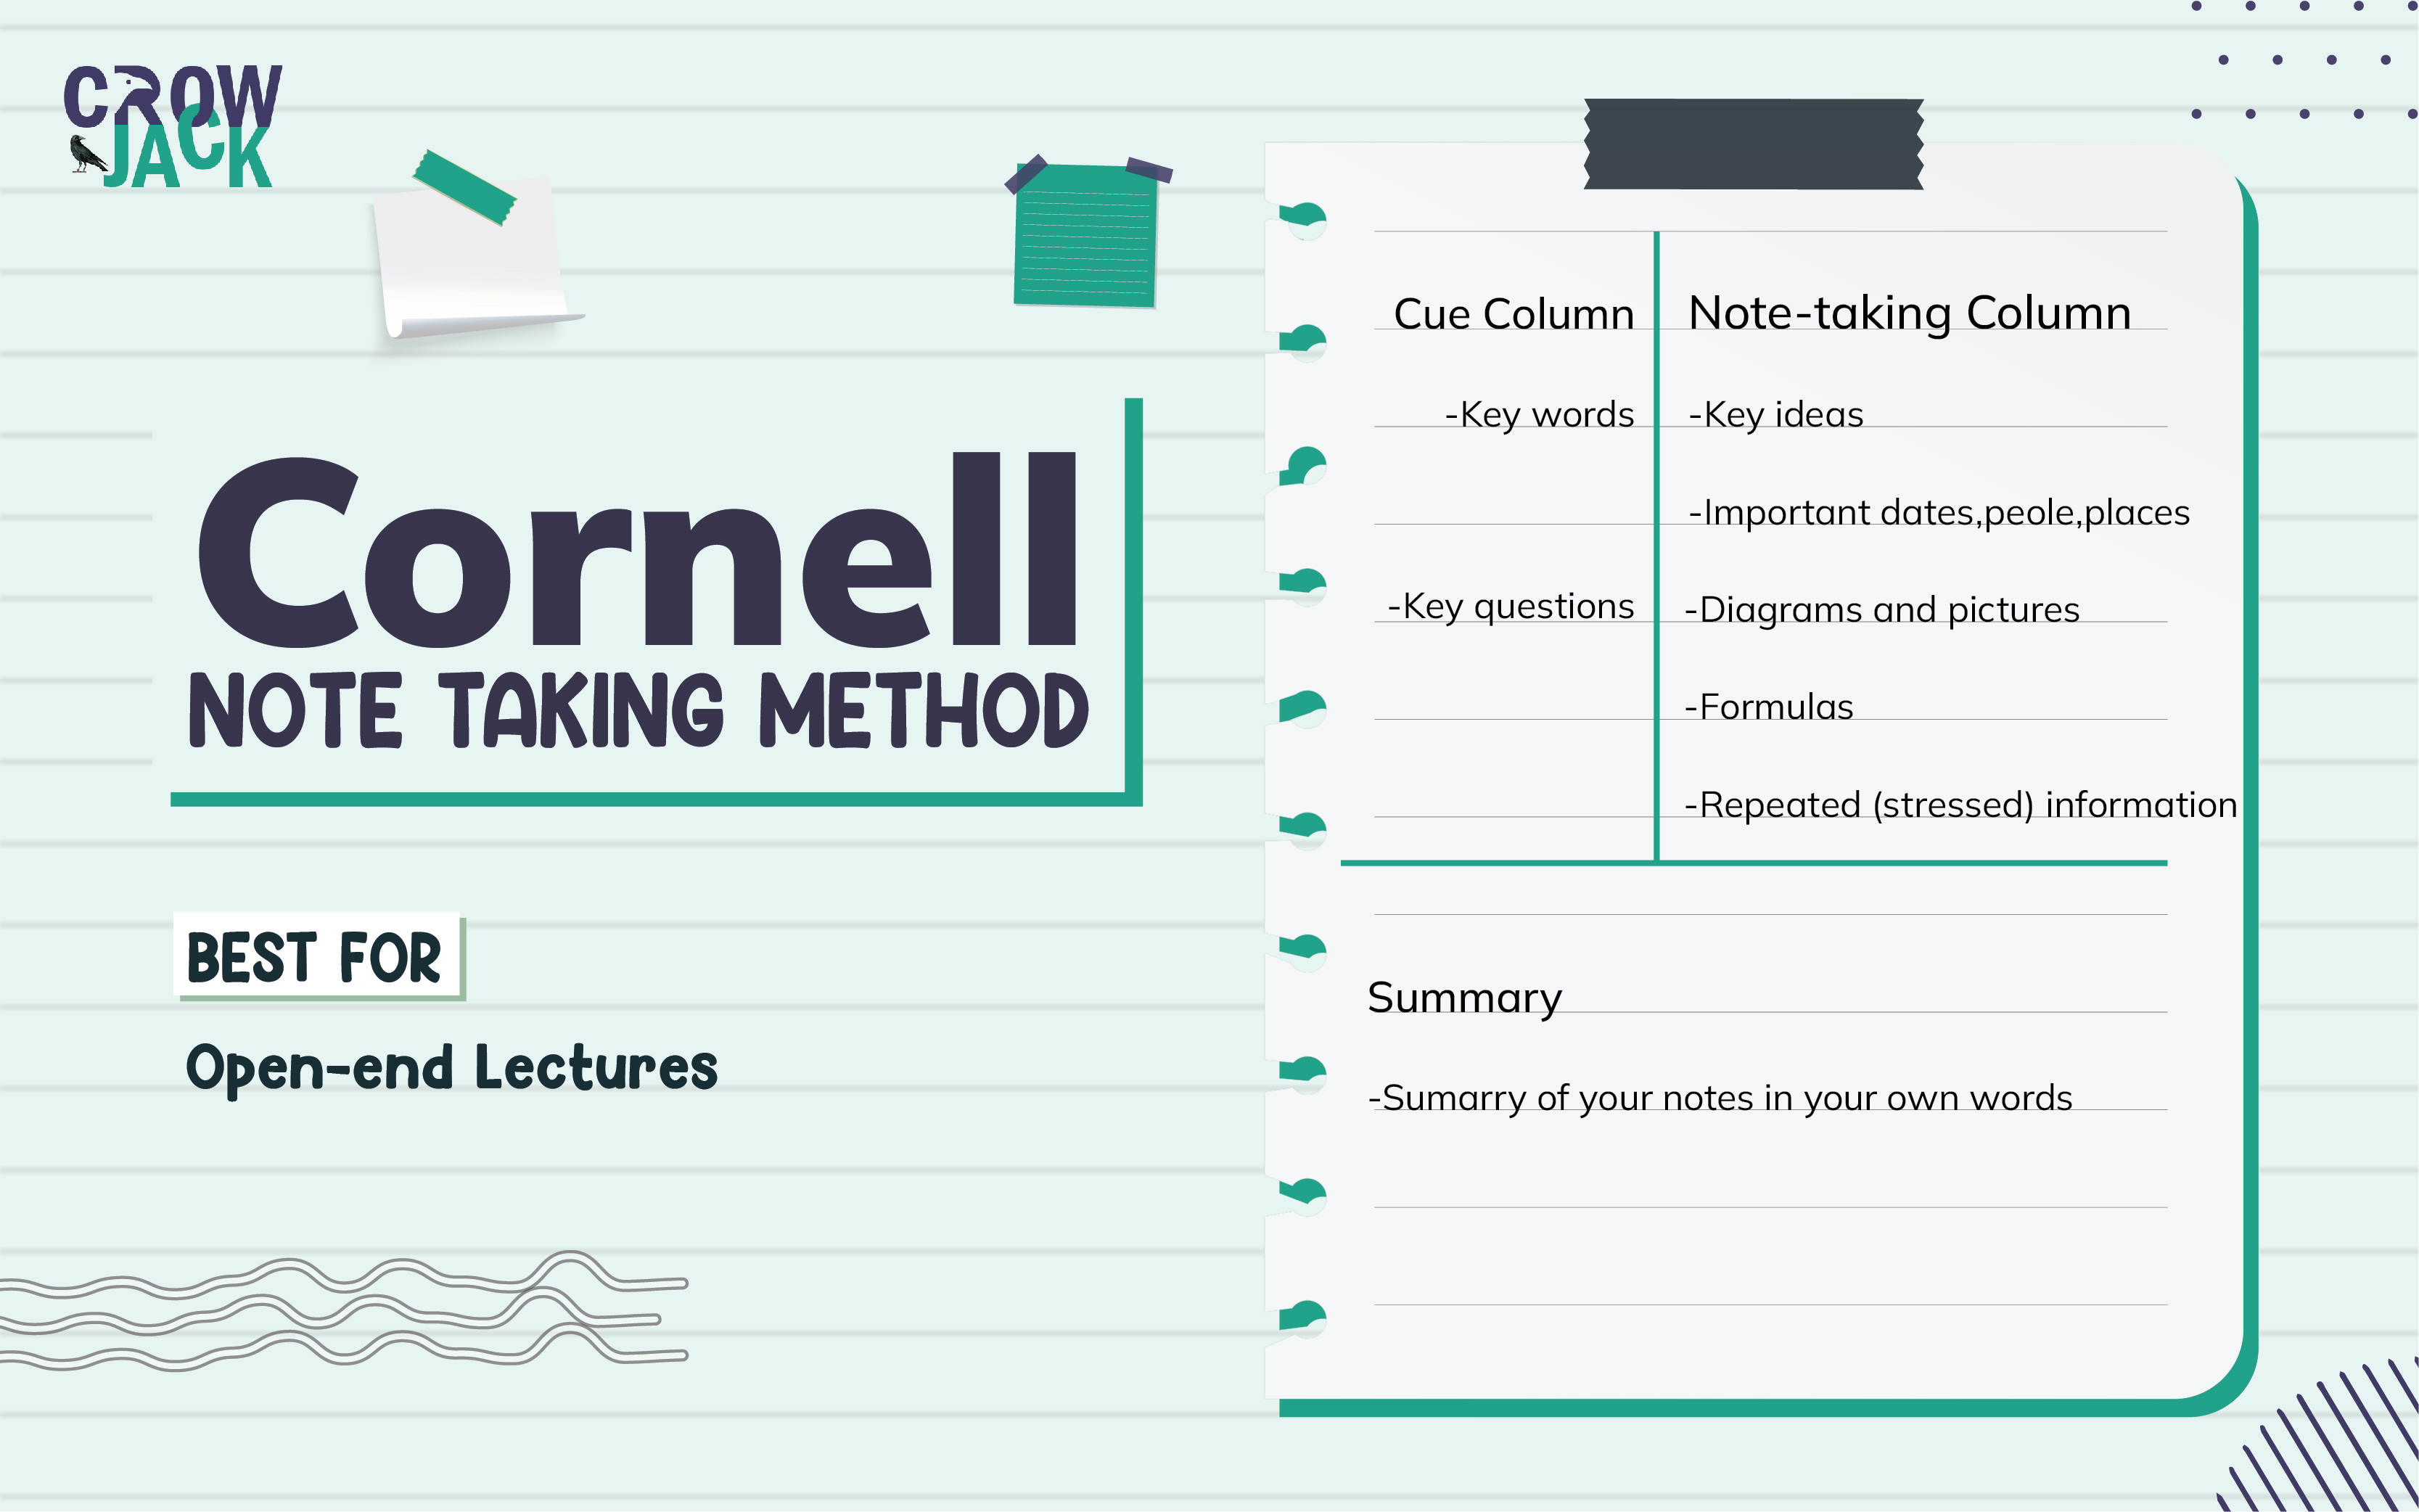 When to use the Cornell Method for note taking